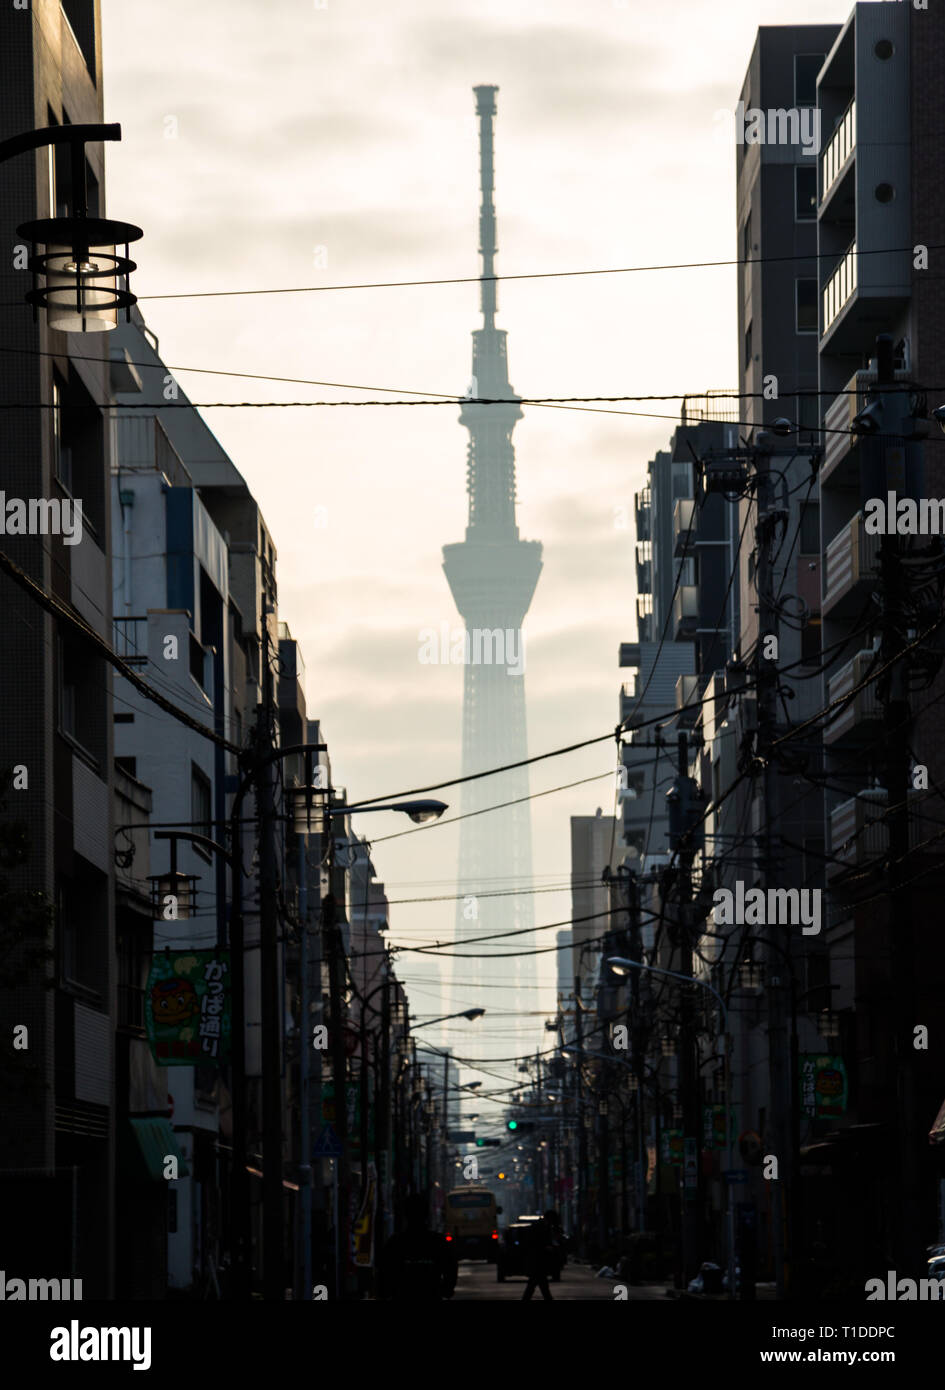 The Skytree towers over Tokyo, Japan. seen from a narrow alley the tower is just a dark looming shadow in early morning light looking through the smog Stock Photo